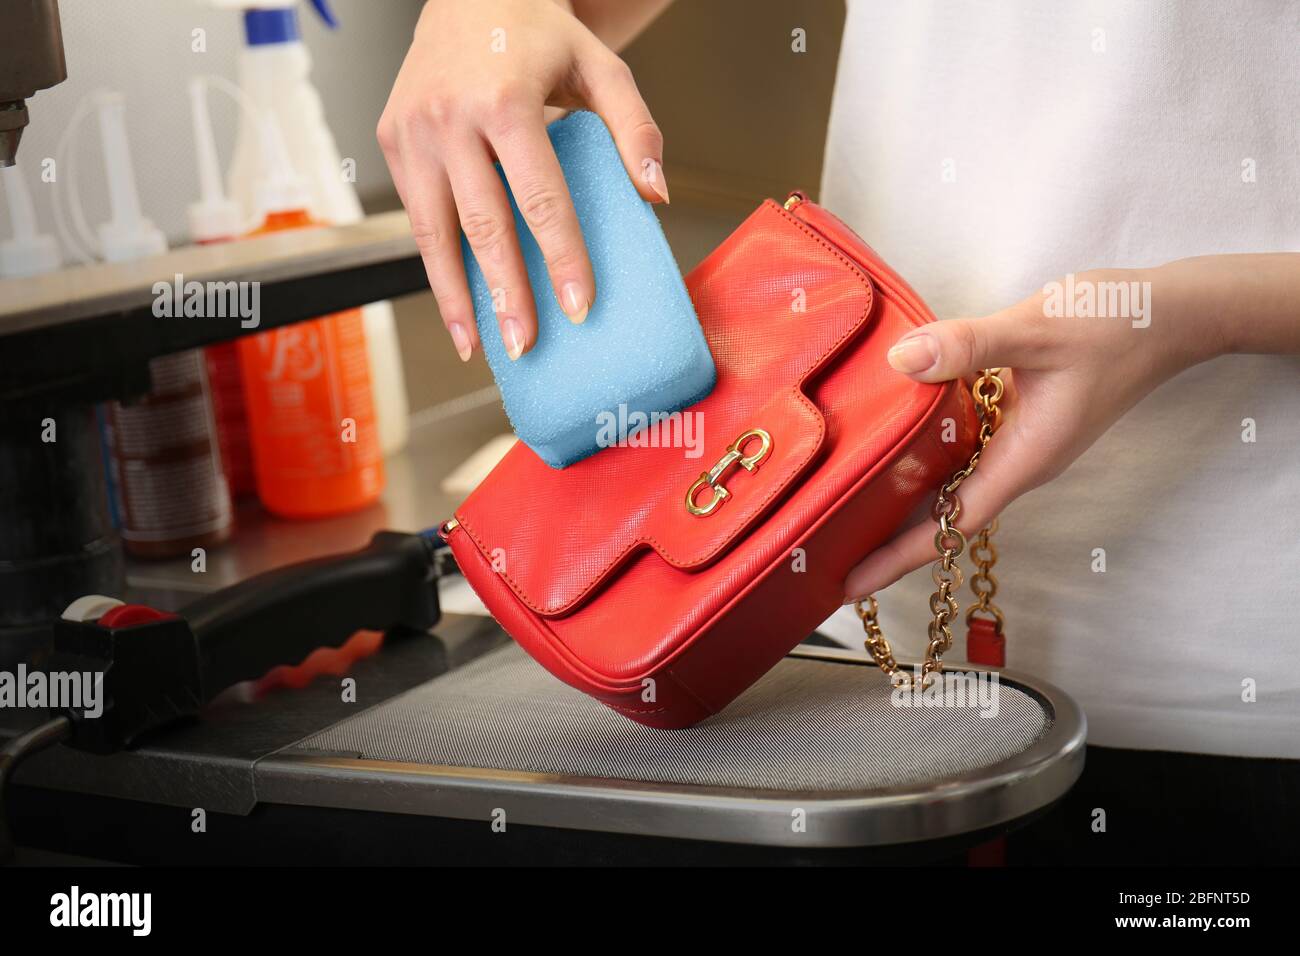 Dry cleaning business concept. Woman washing bag with sponge Stock Photo -  Alamy